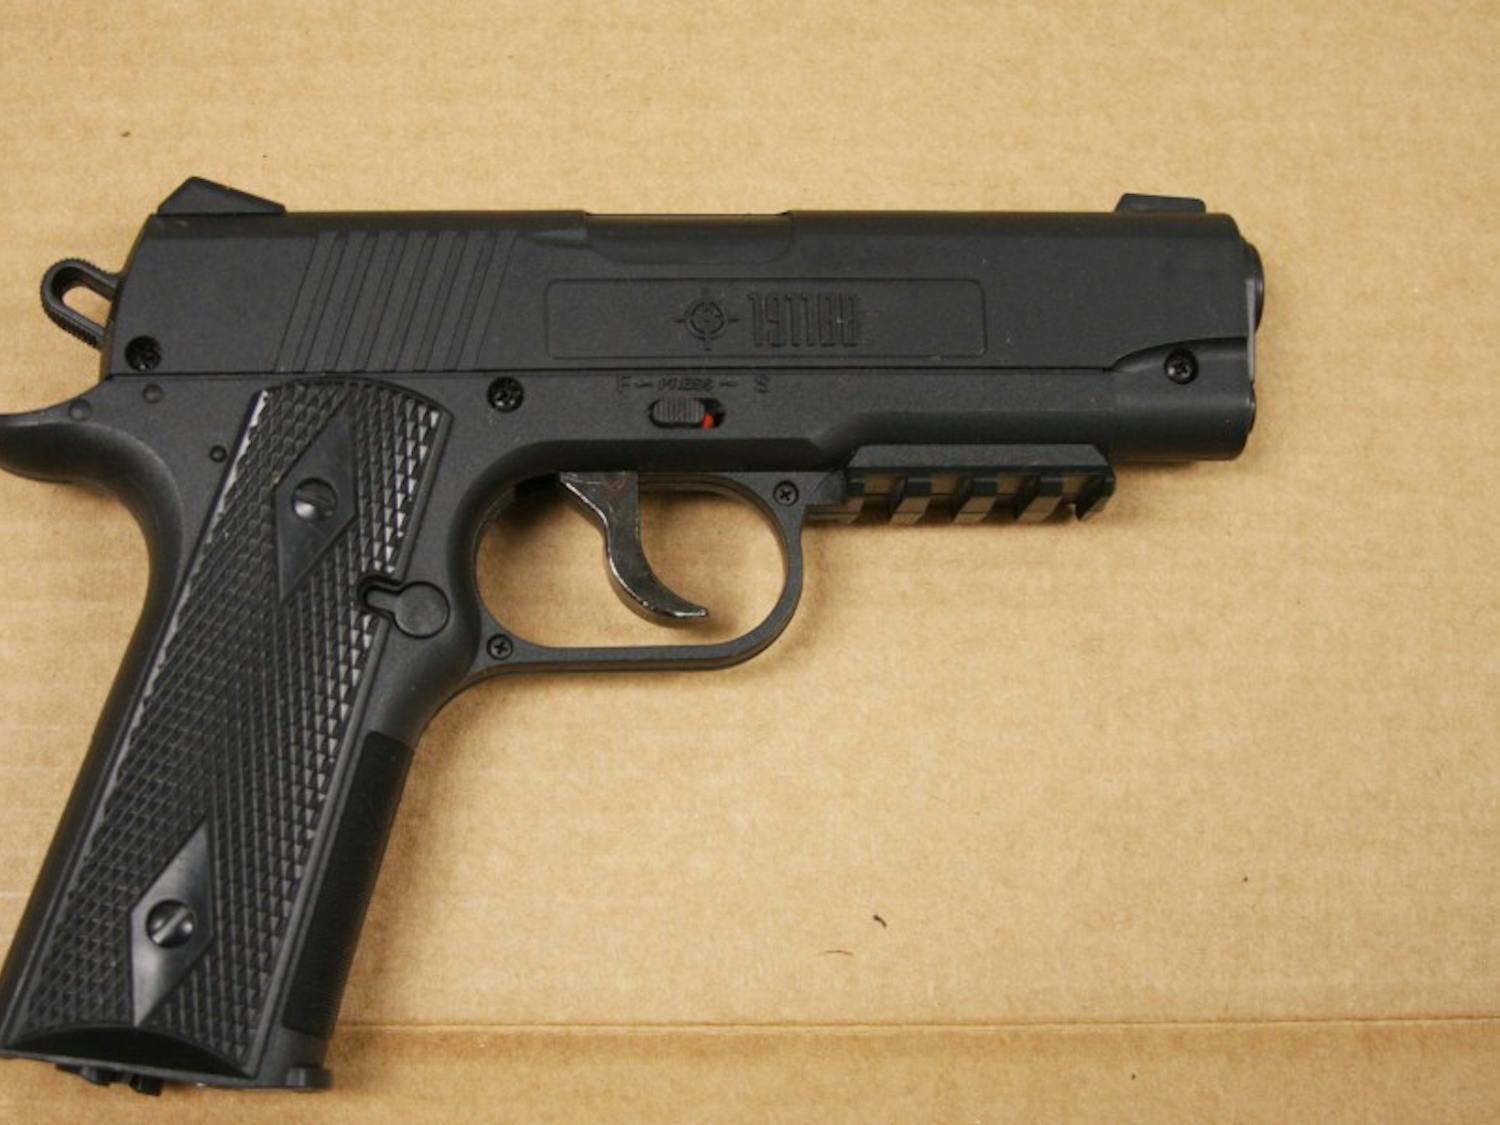 Two teenage boys were arrested carrying BB guns in relation to an incident in which a man was robbed.